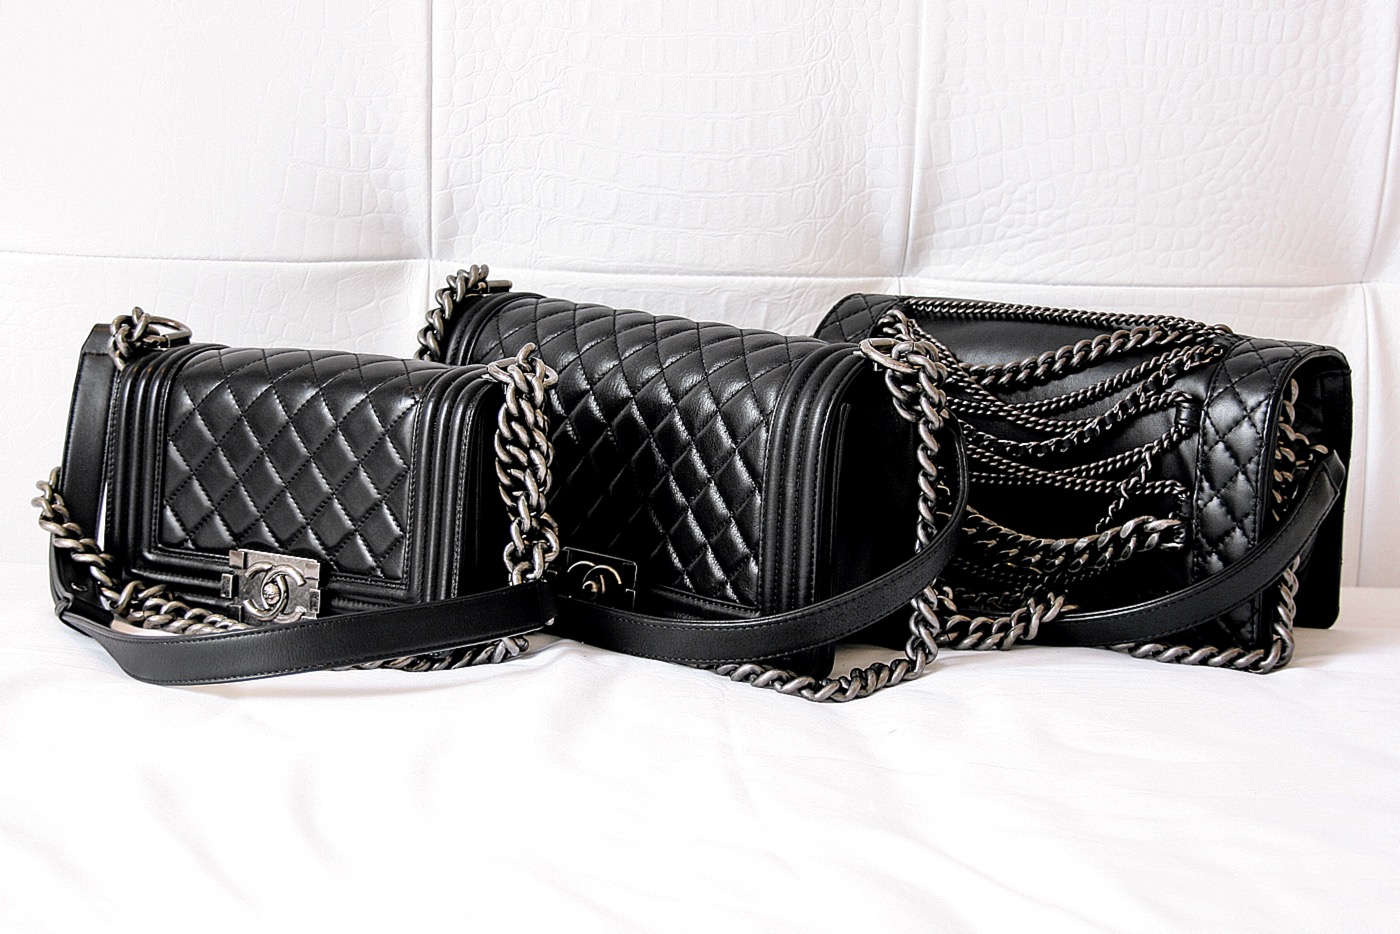 The Chanel Boy Bag – inspired by Gabrielle Chanel